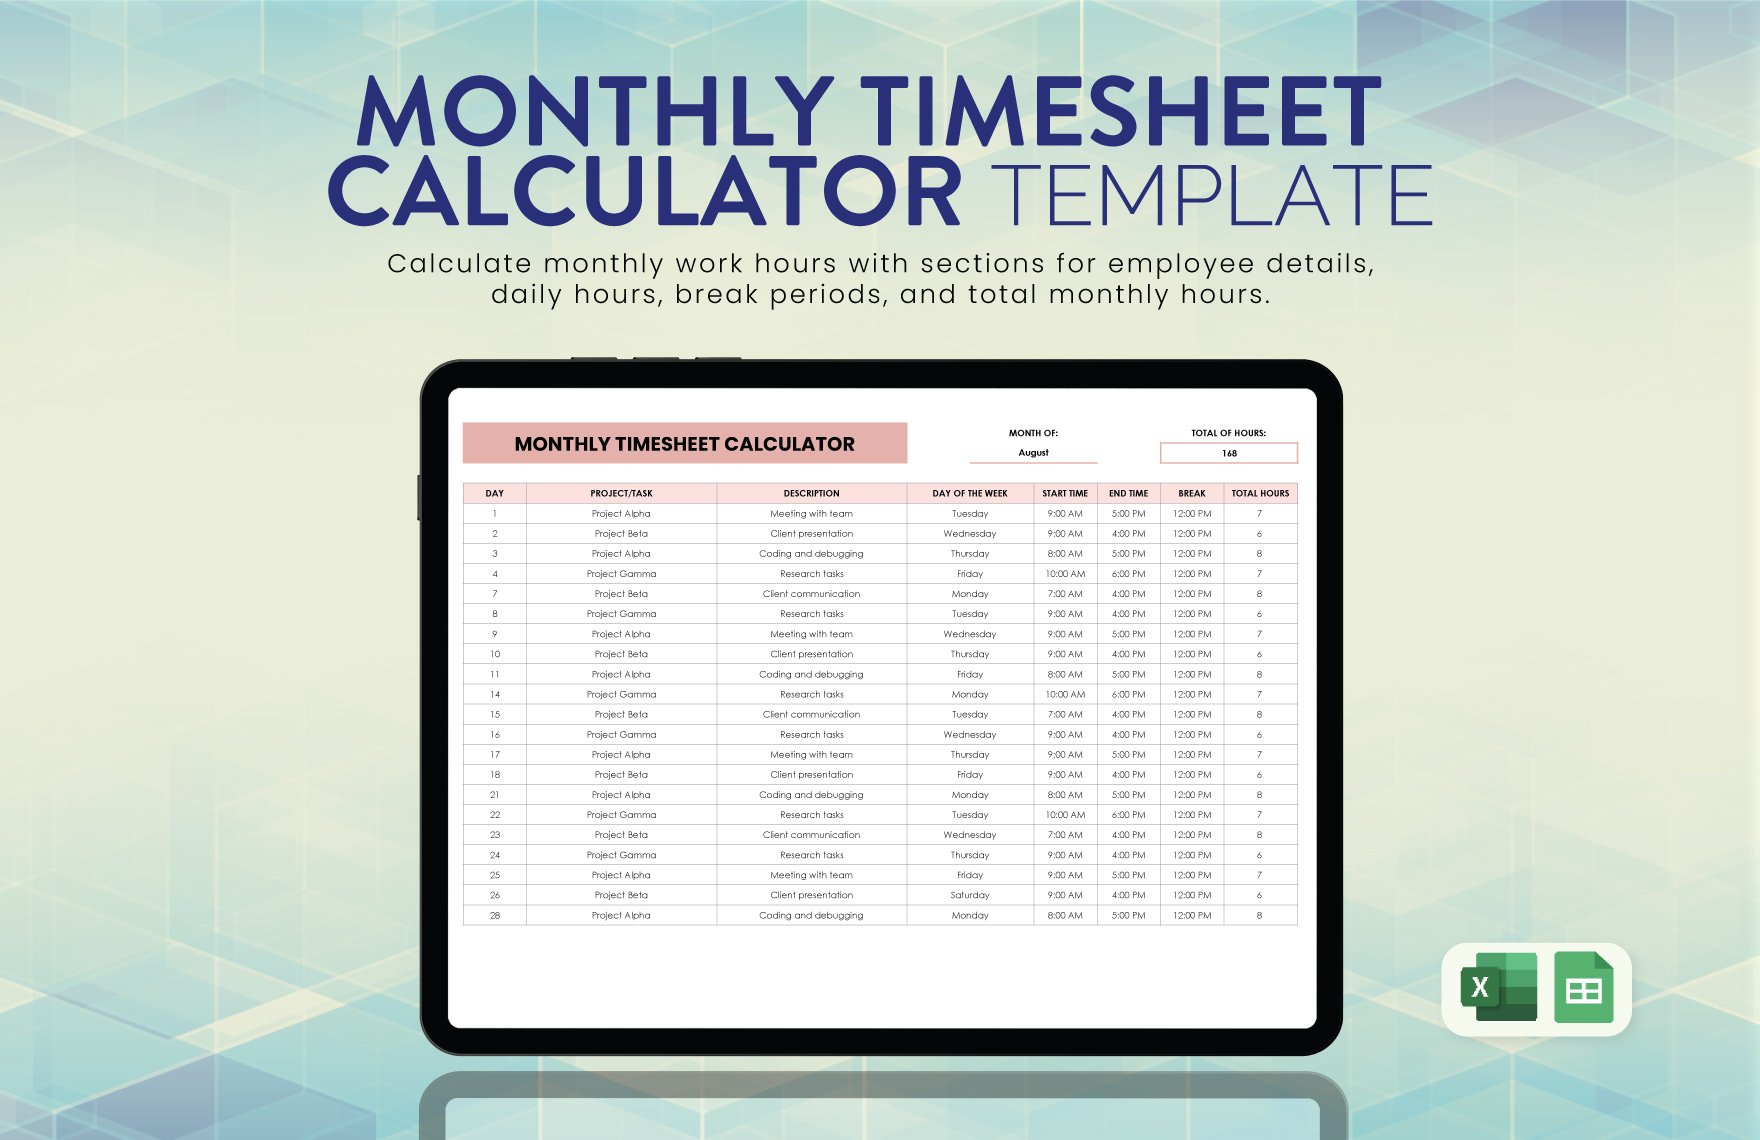 Monthly Timesheet Calculator Template in Excel, Google Sheets